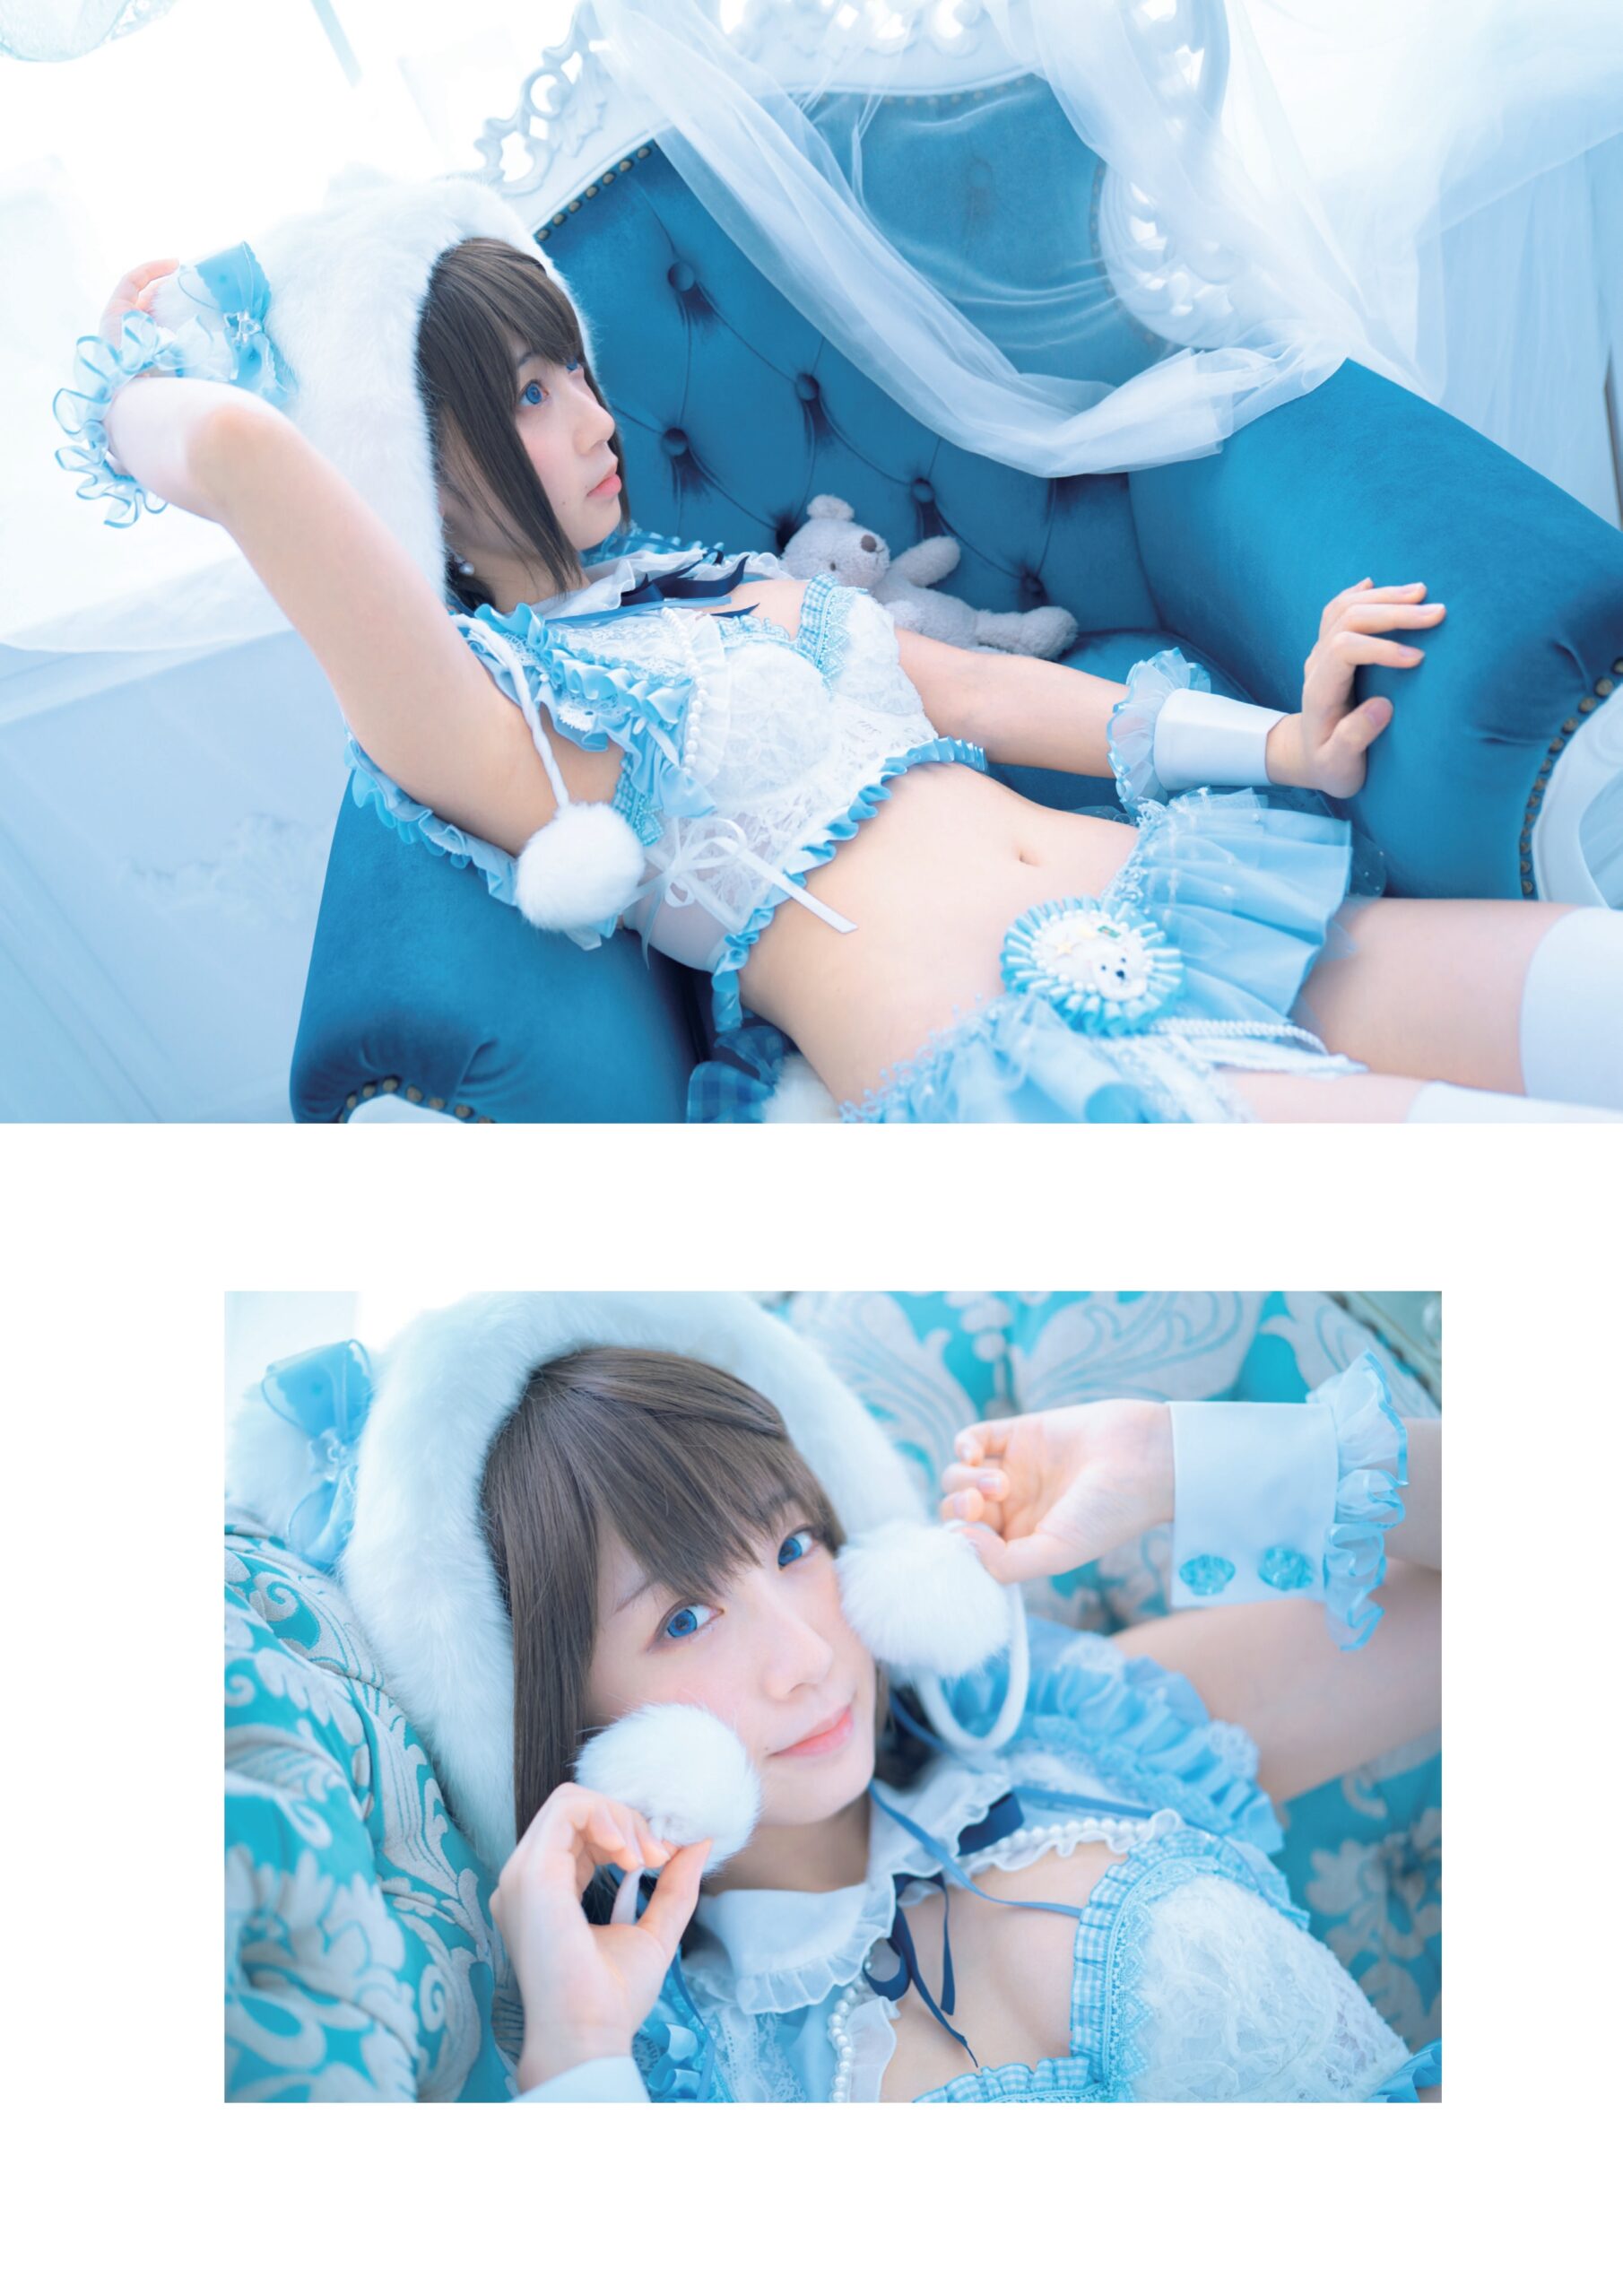 This is the sample picture from Moe Iori｜伊織もえ - Kumamoe post. Click here to see image full size.